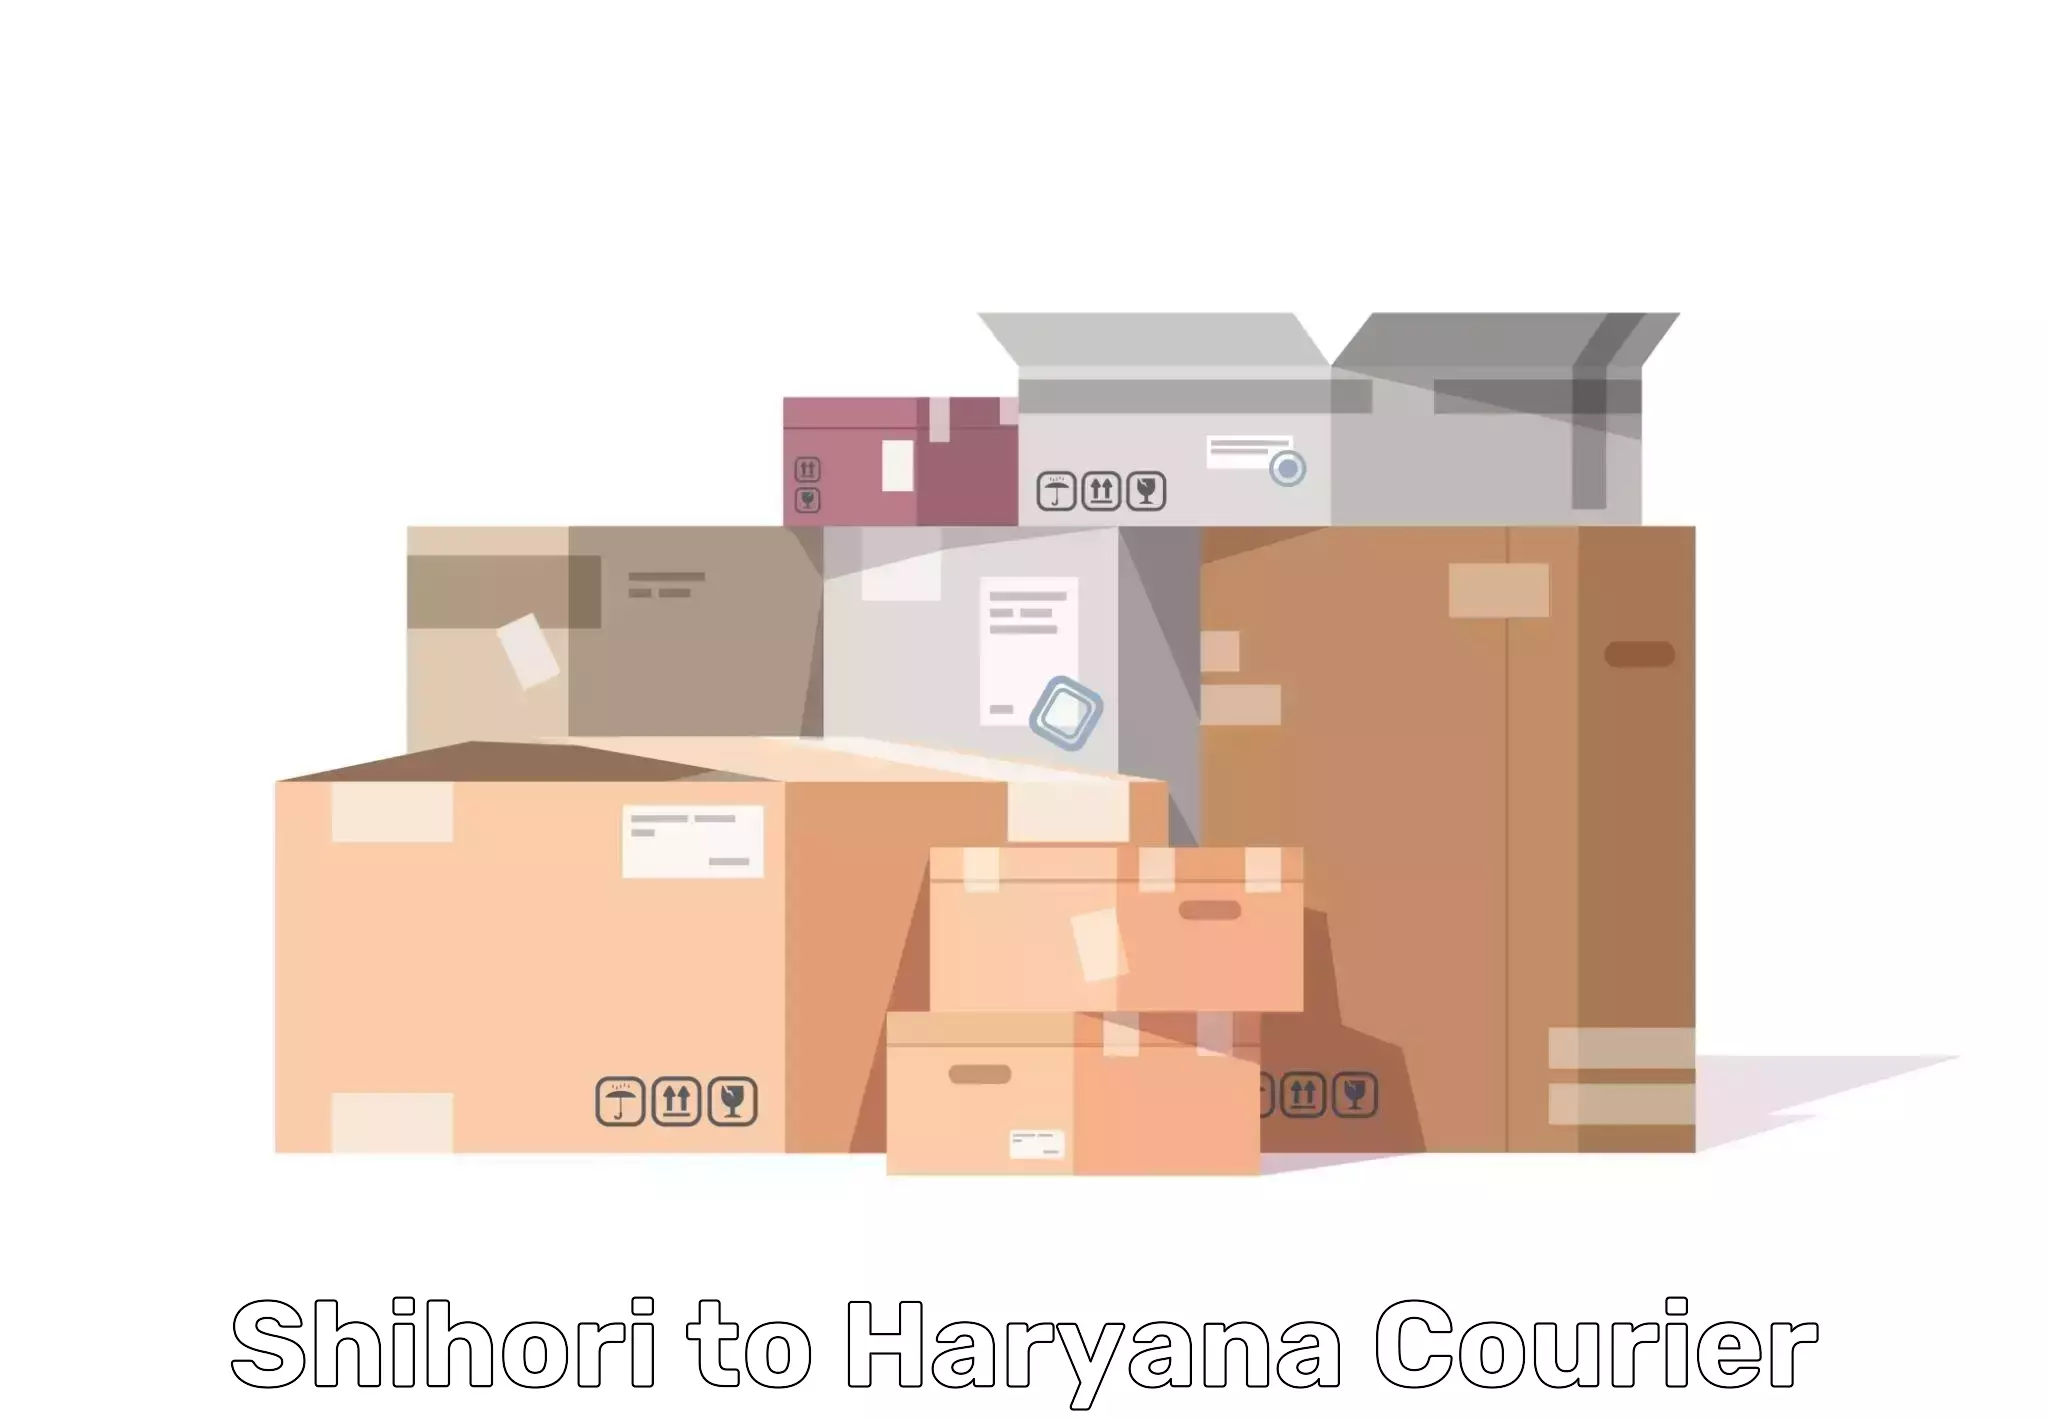 Home moving specialists Shihori to NCR Haryana